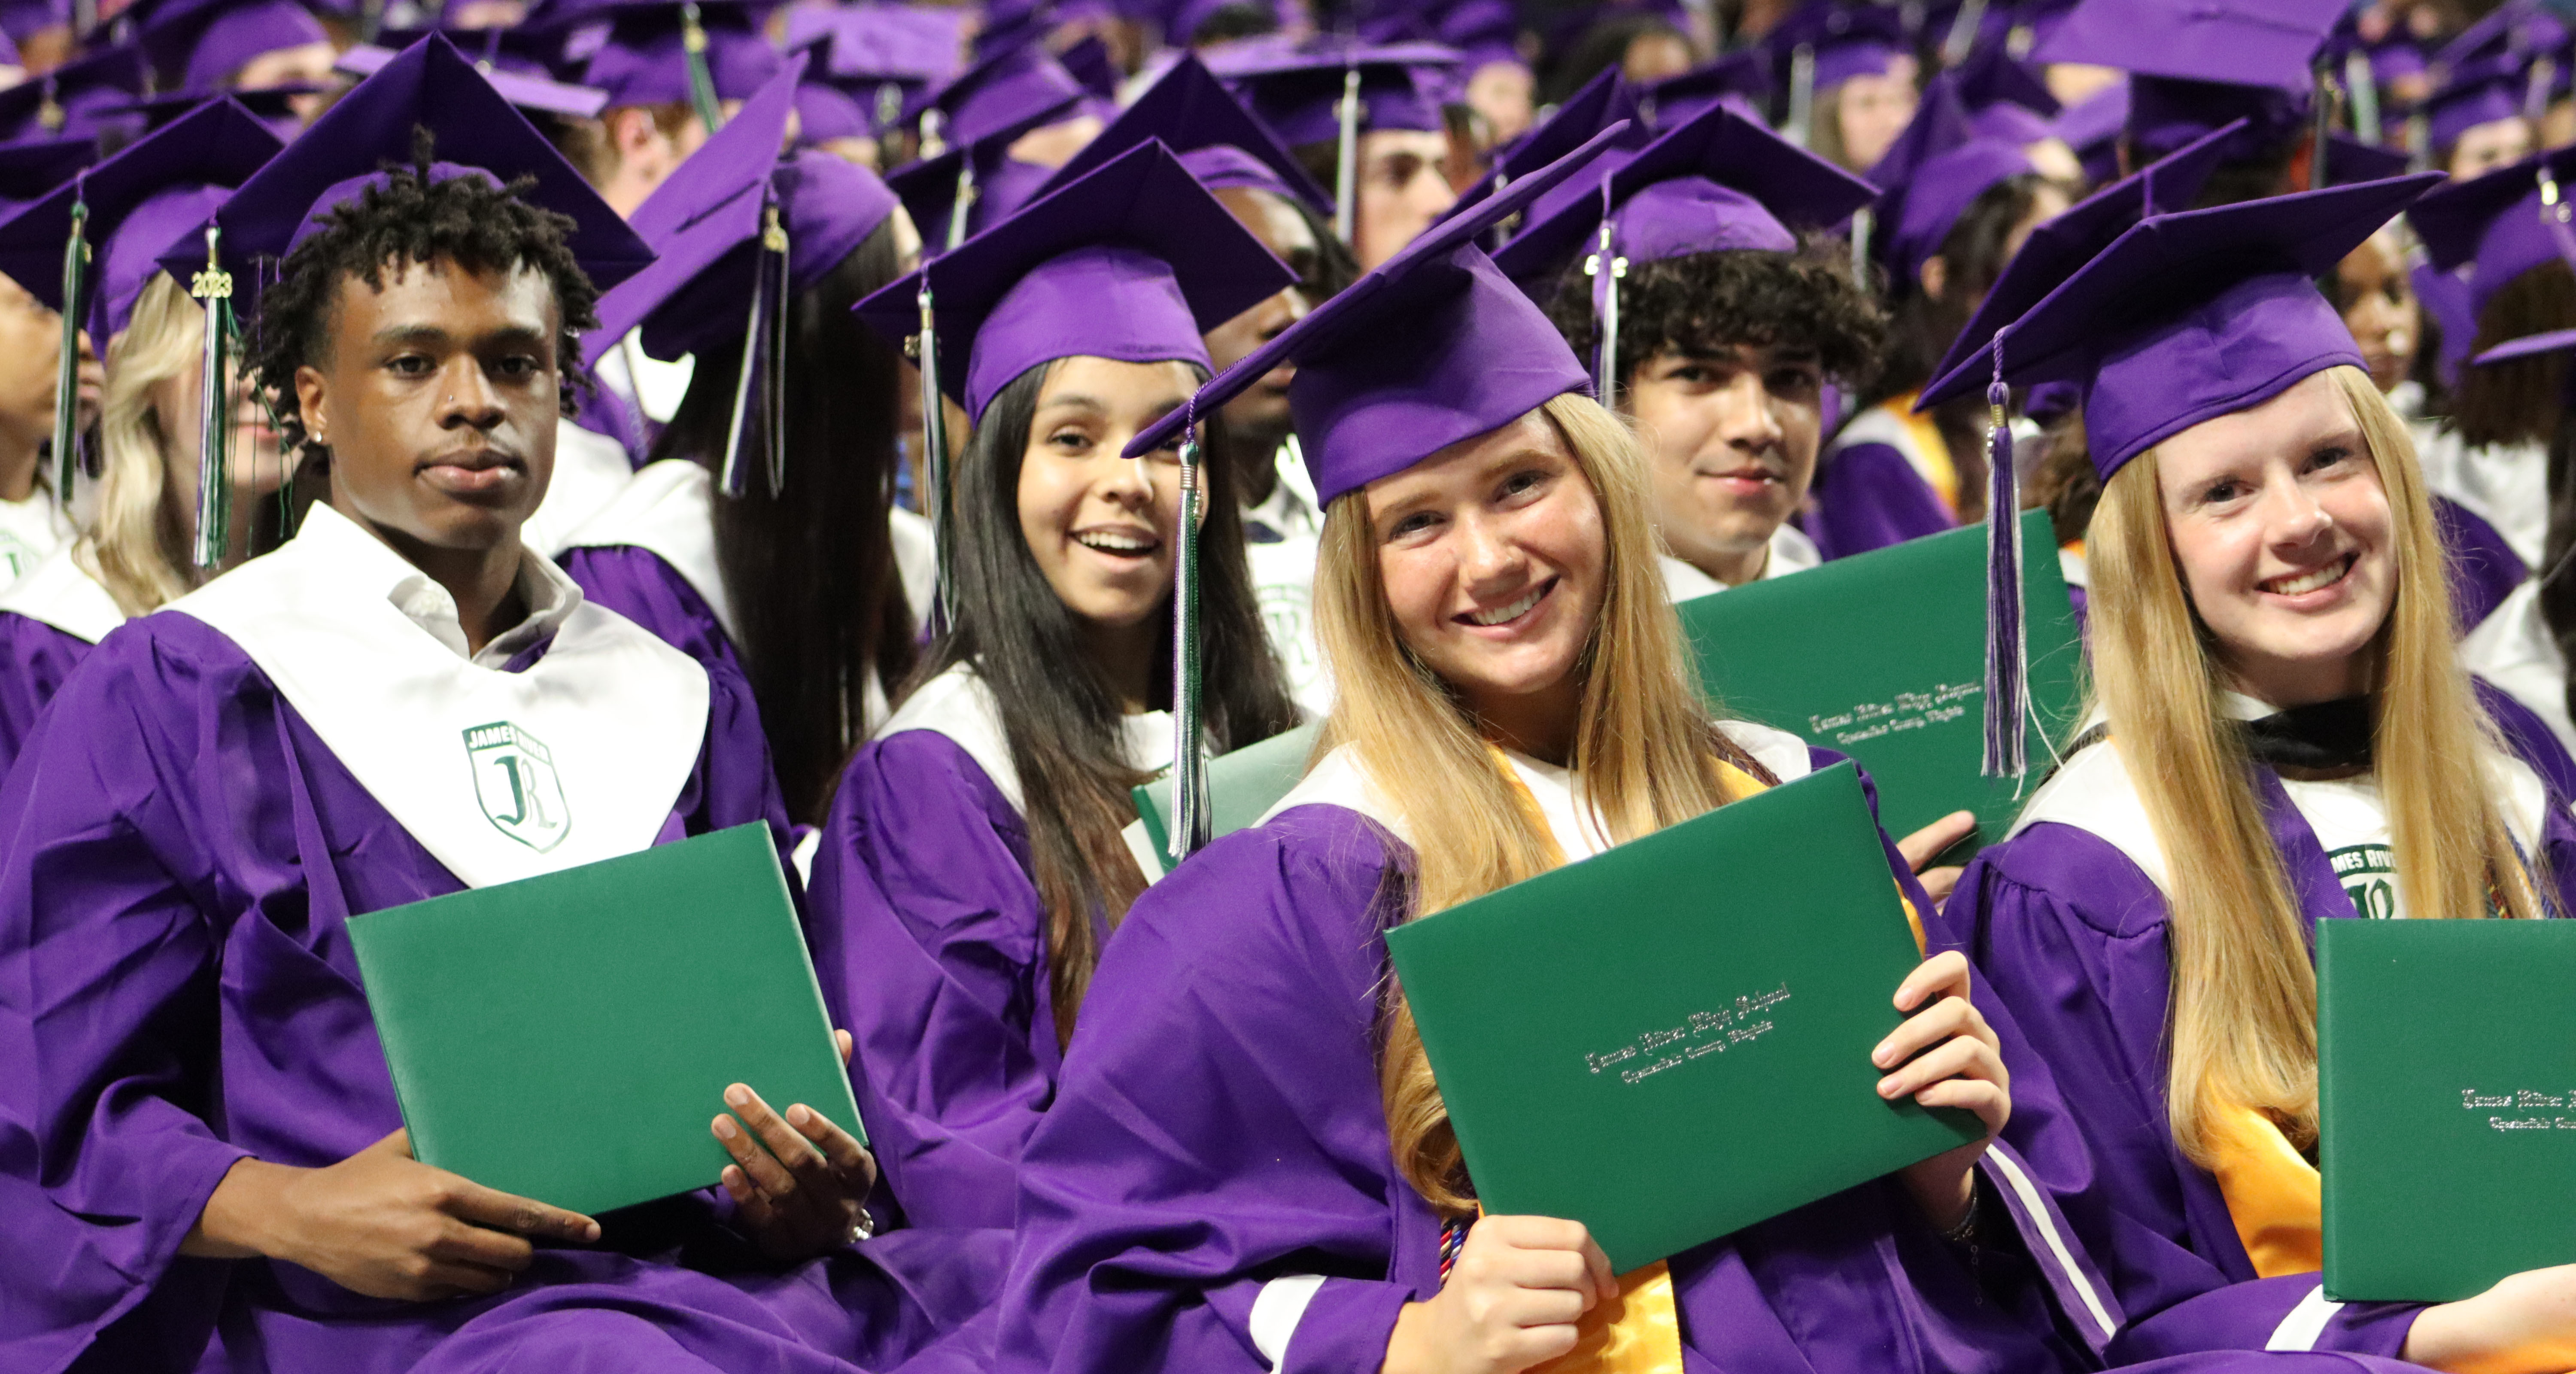 Seniors holding their diploma during a graduation ceremony